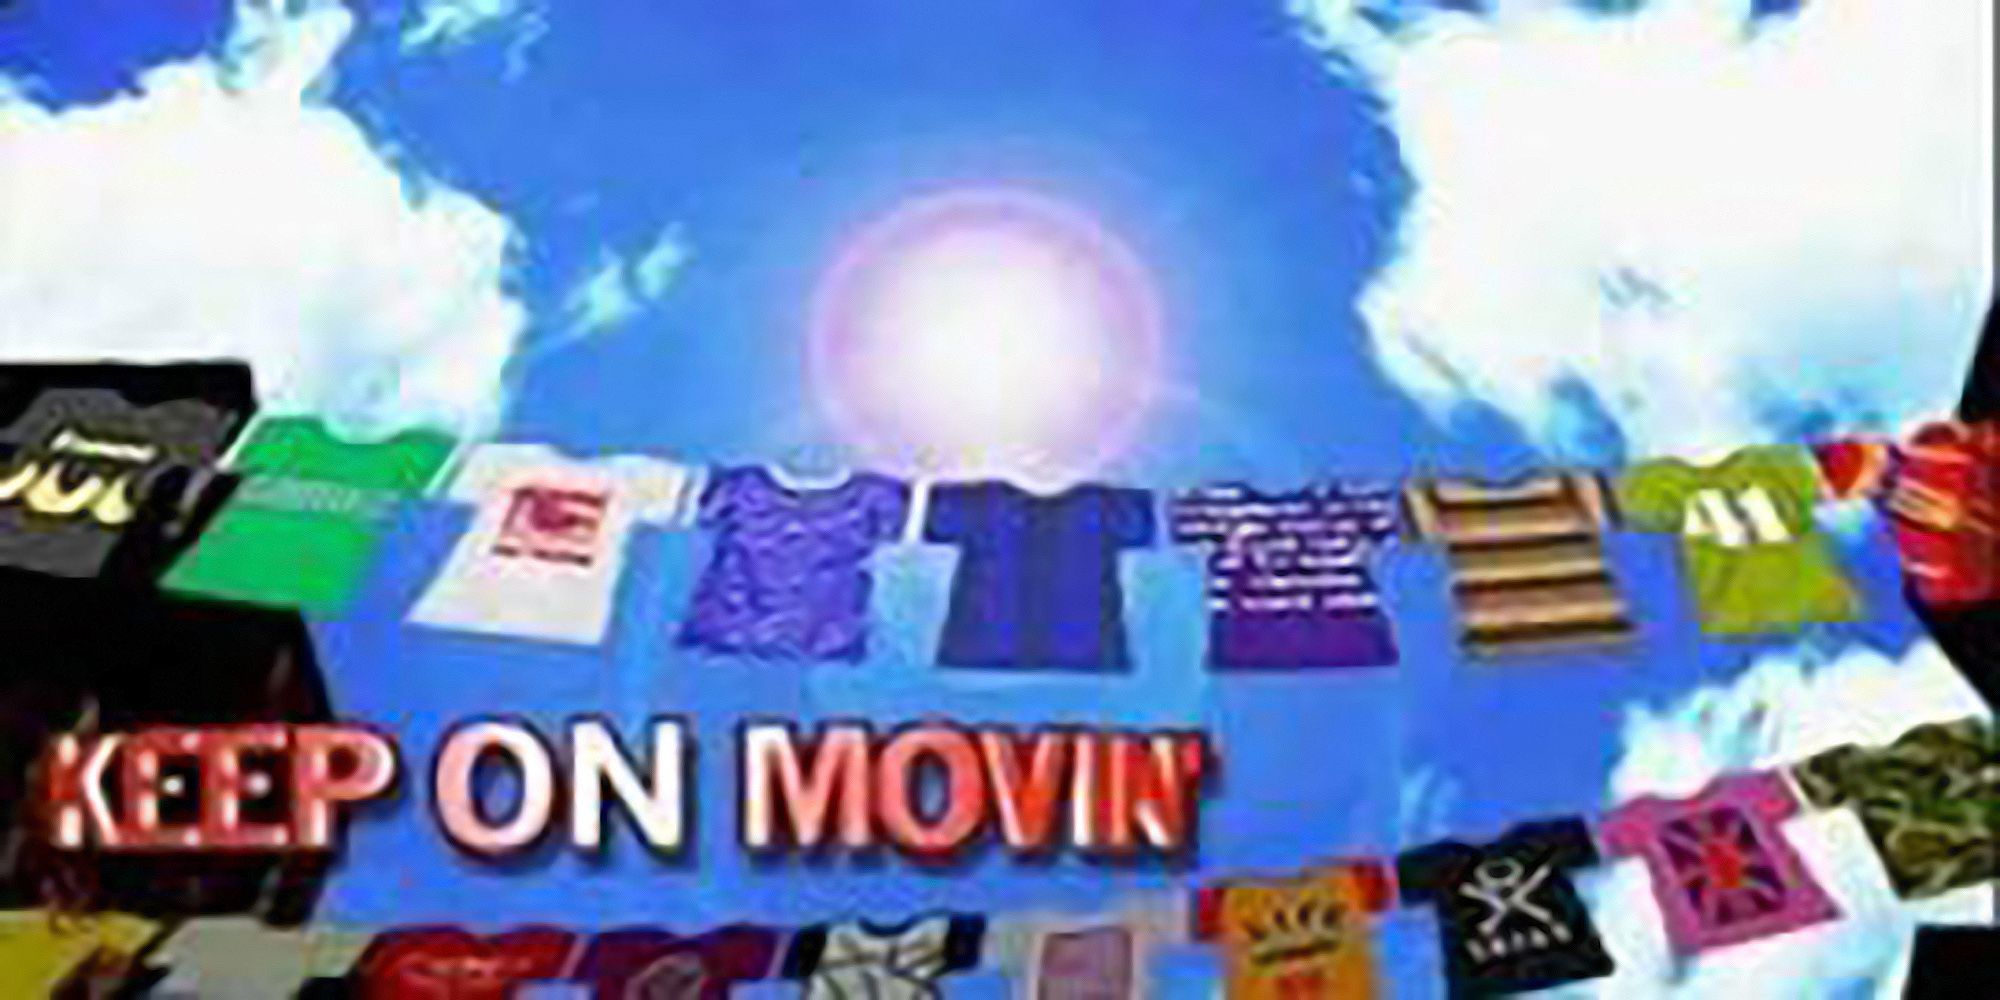 Clothing lines adorn a city street in the background for the track, Keep On Movin', from Dance Dance Revolution 2nd Mix.